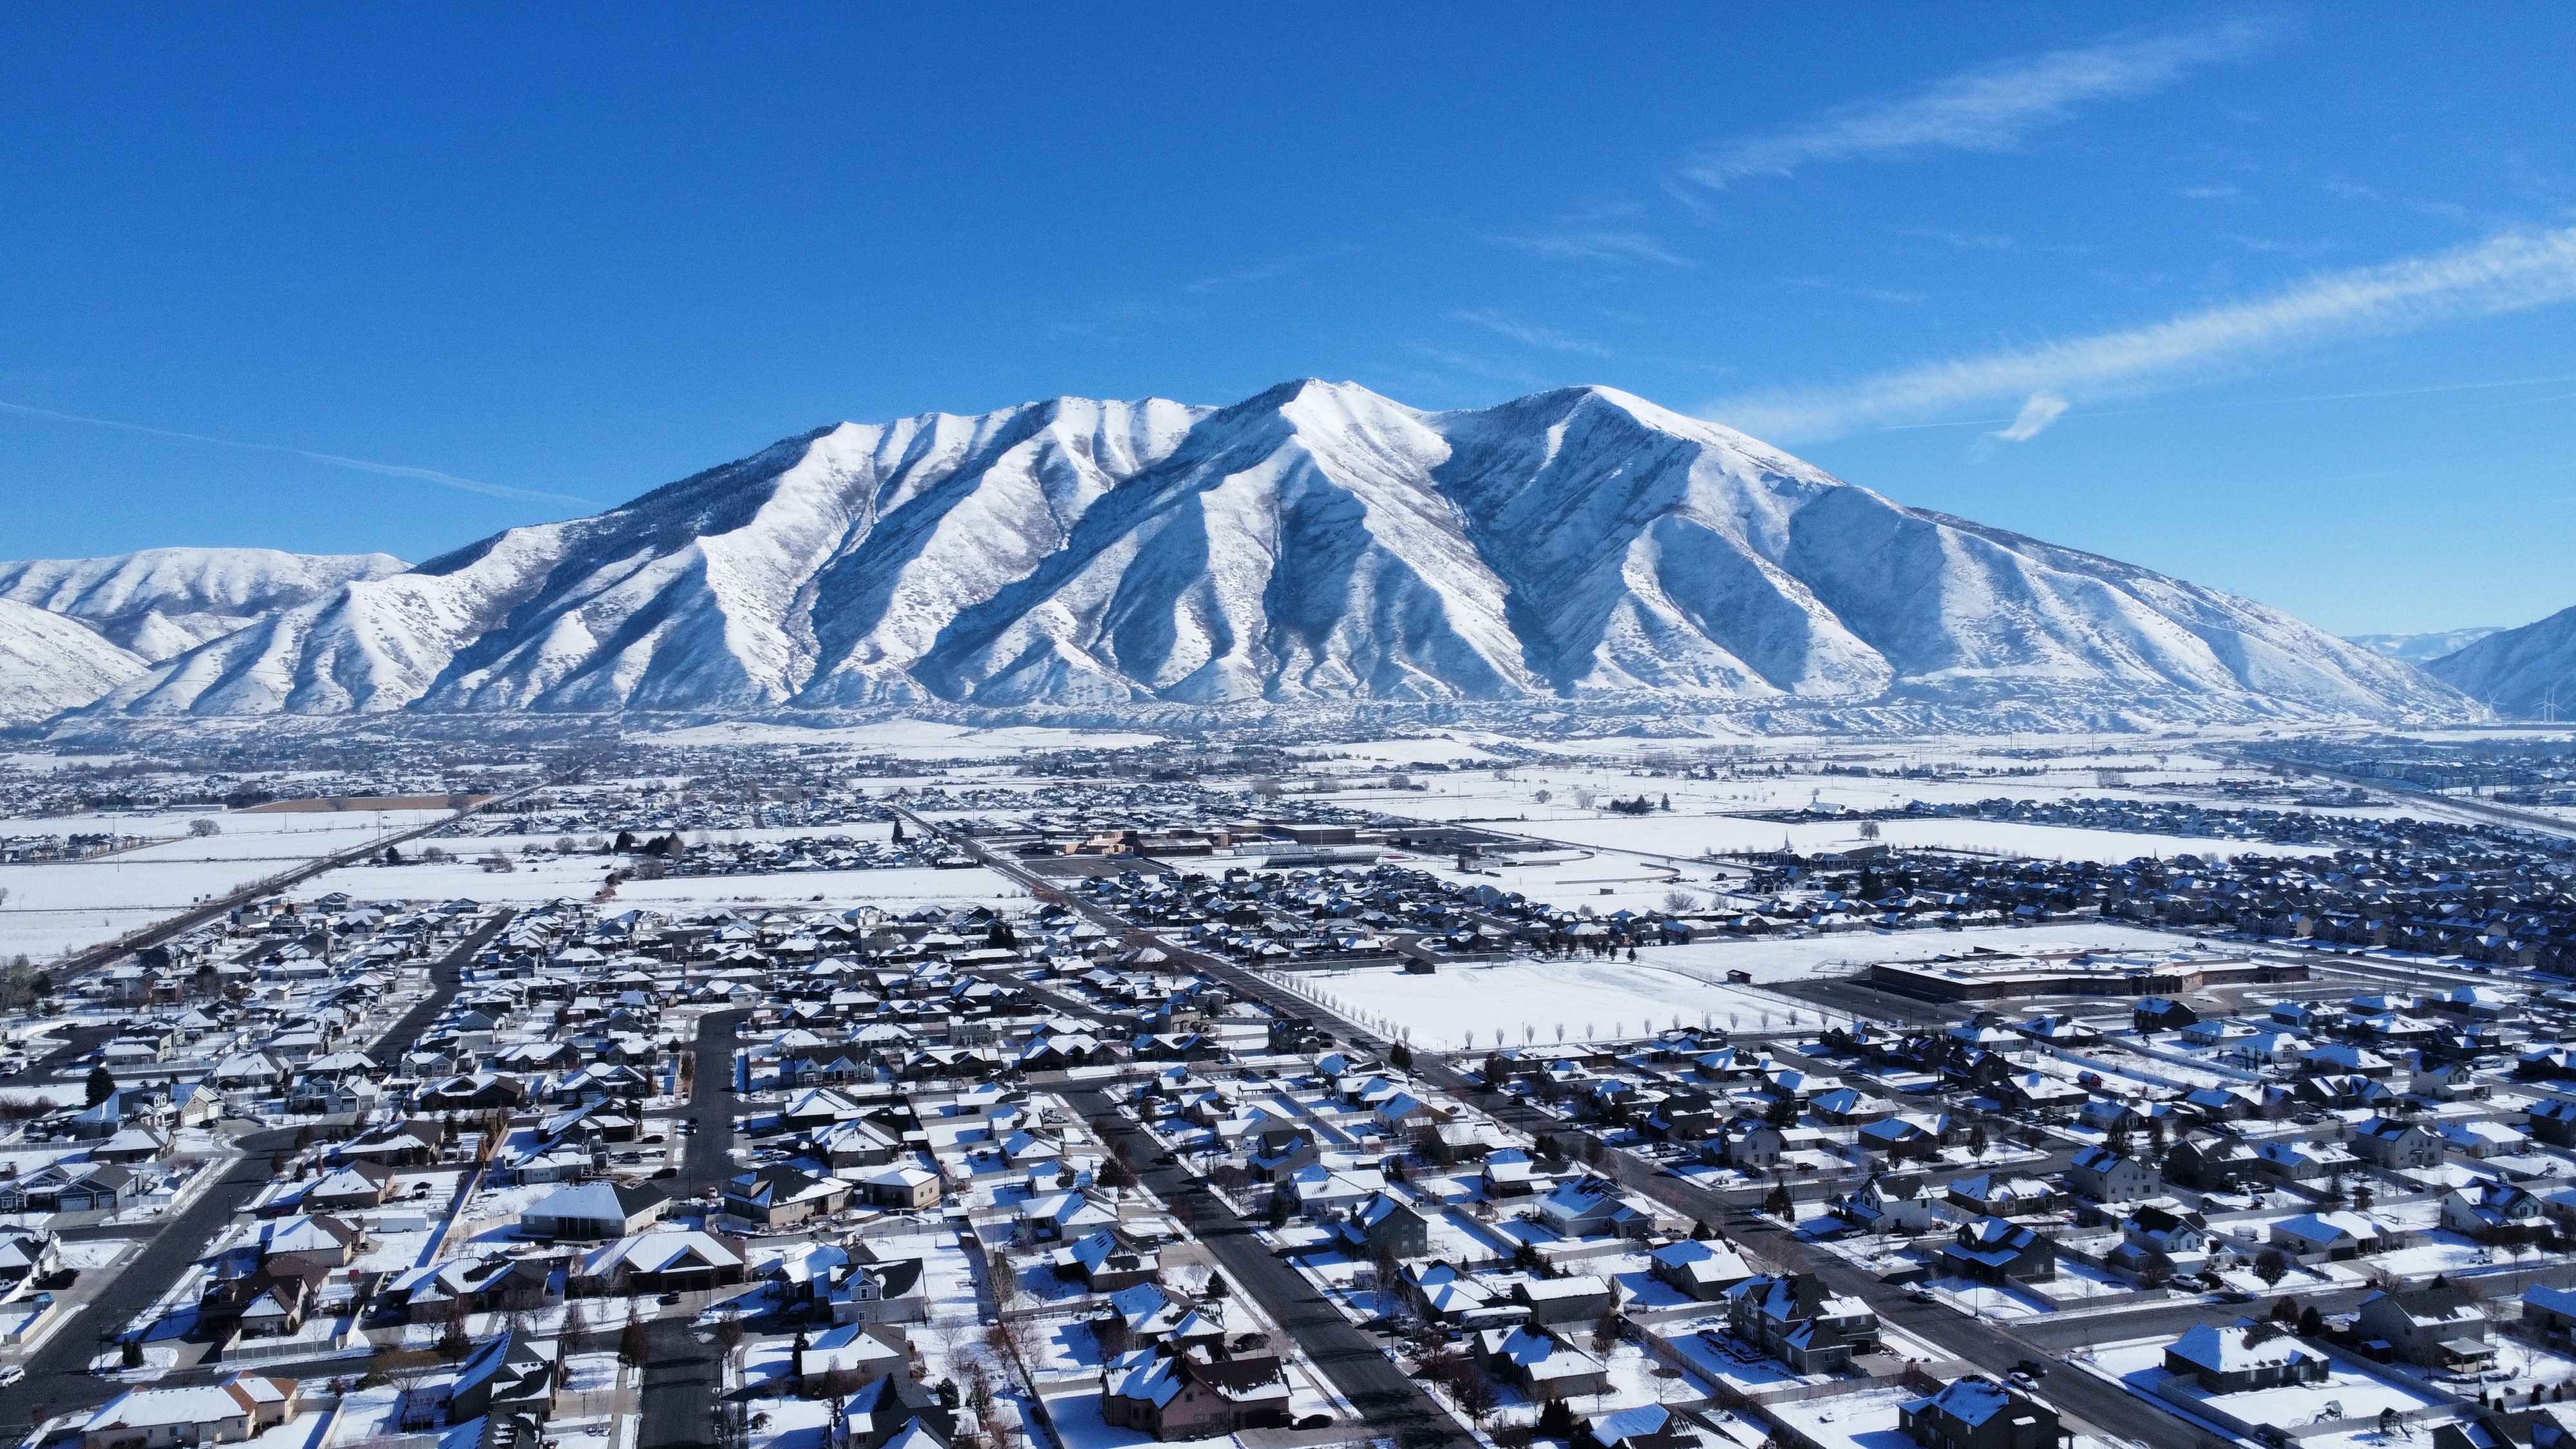 Aerial view of snowcapped mountains against blue sky in Spanish Fork, Utah